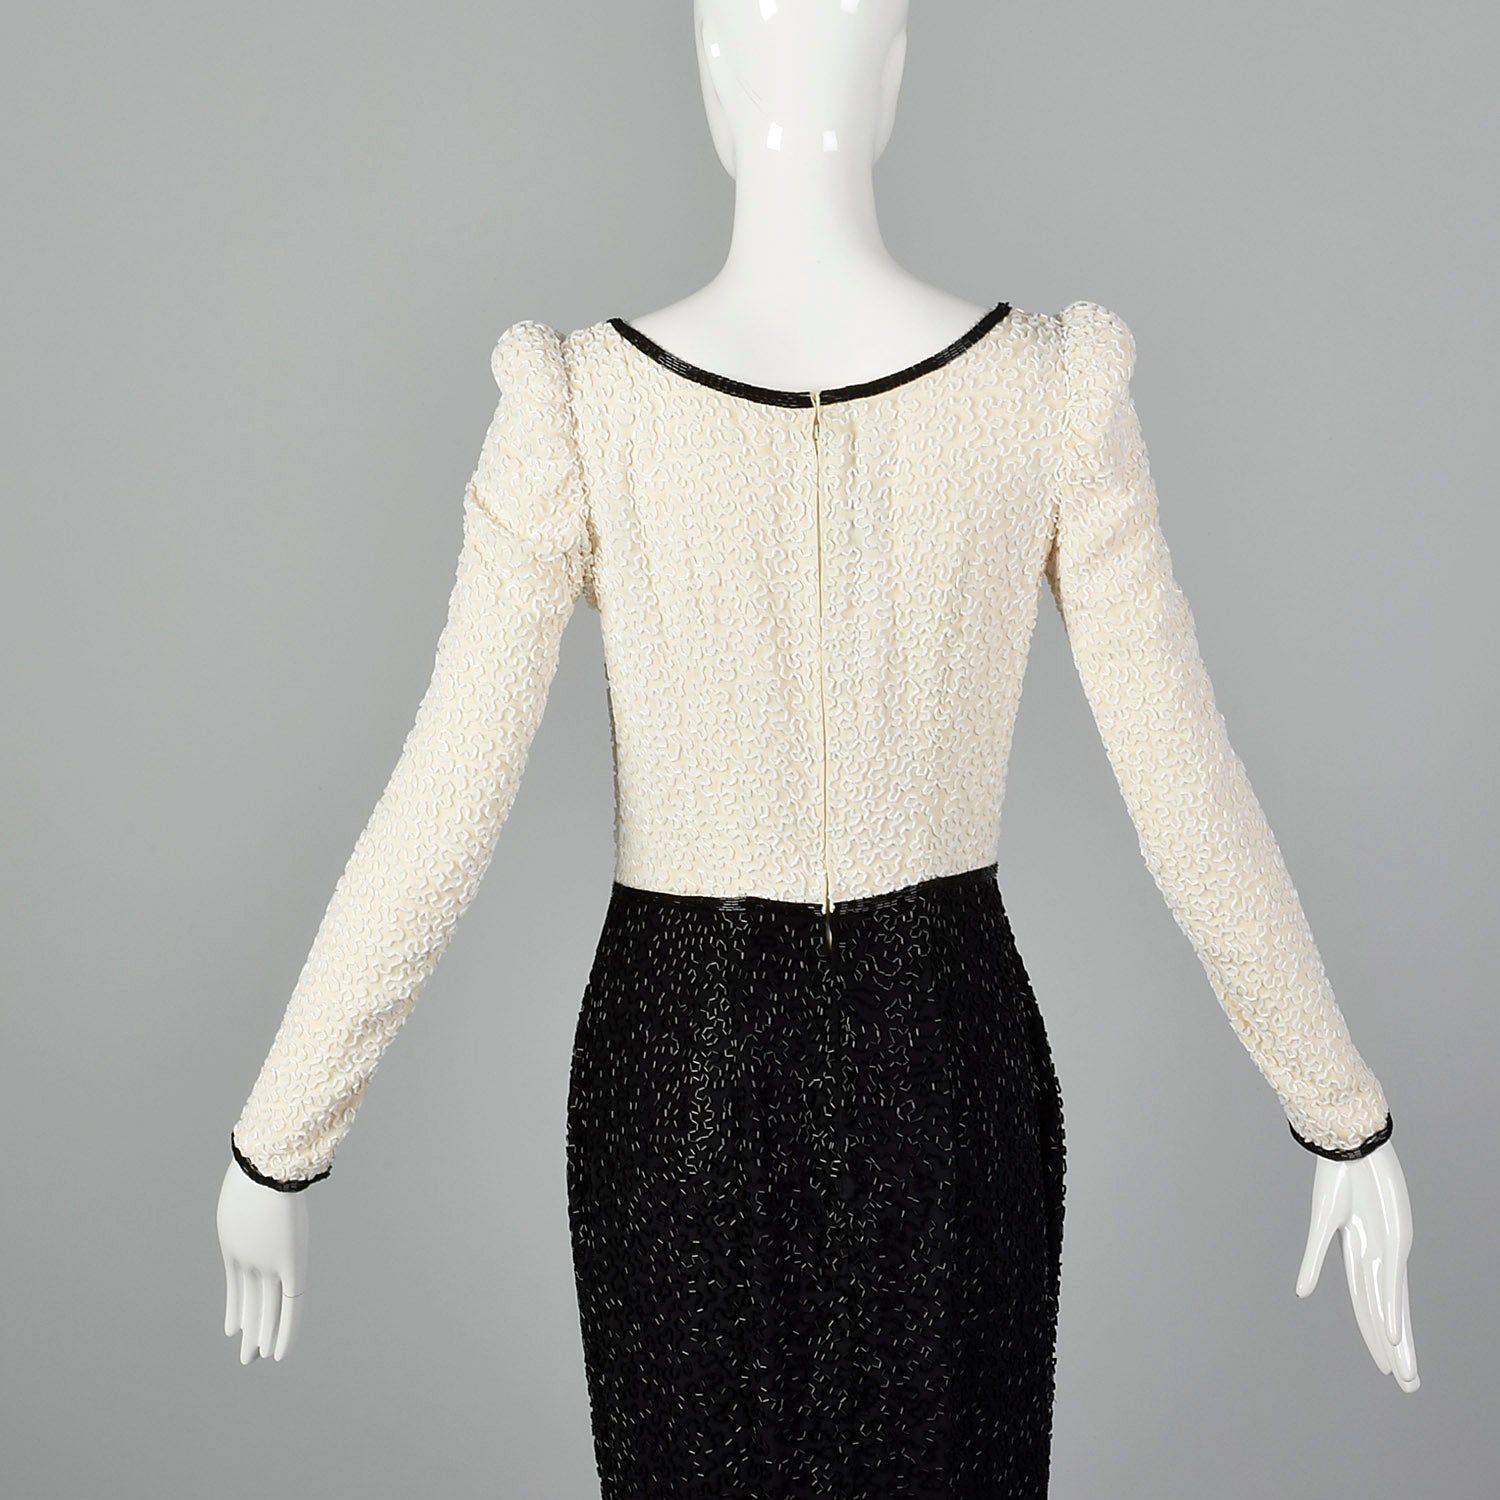 XS Lillie Rubin 1970s Black and White Beaded Gown